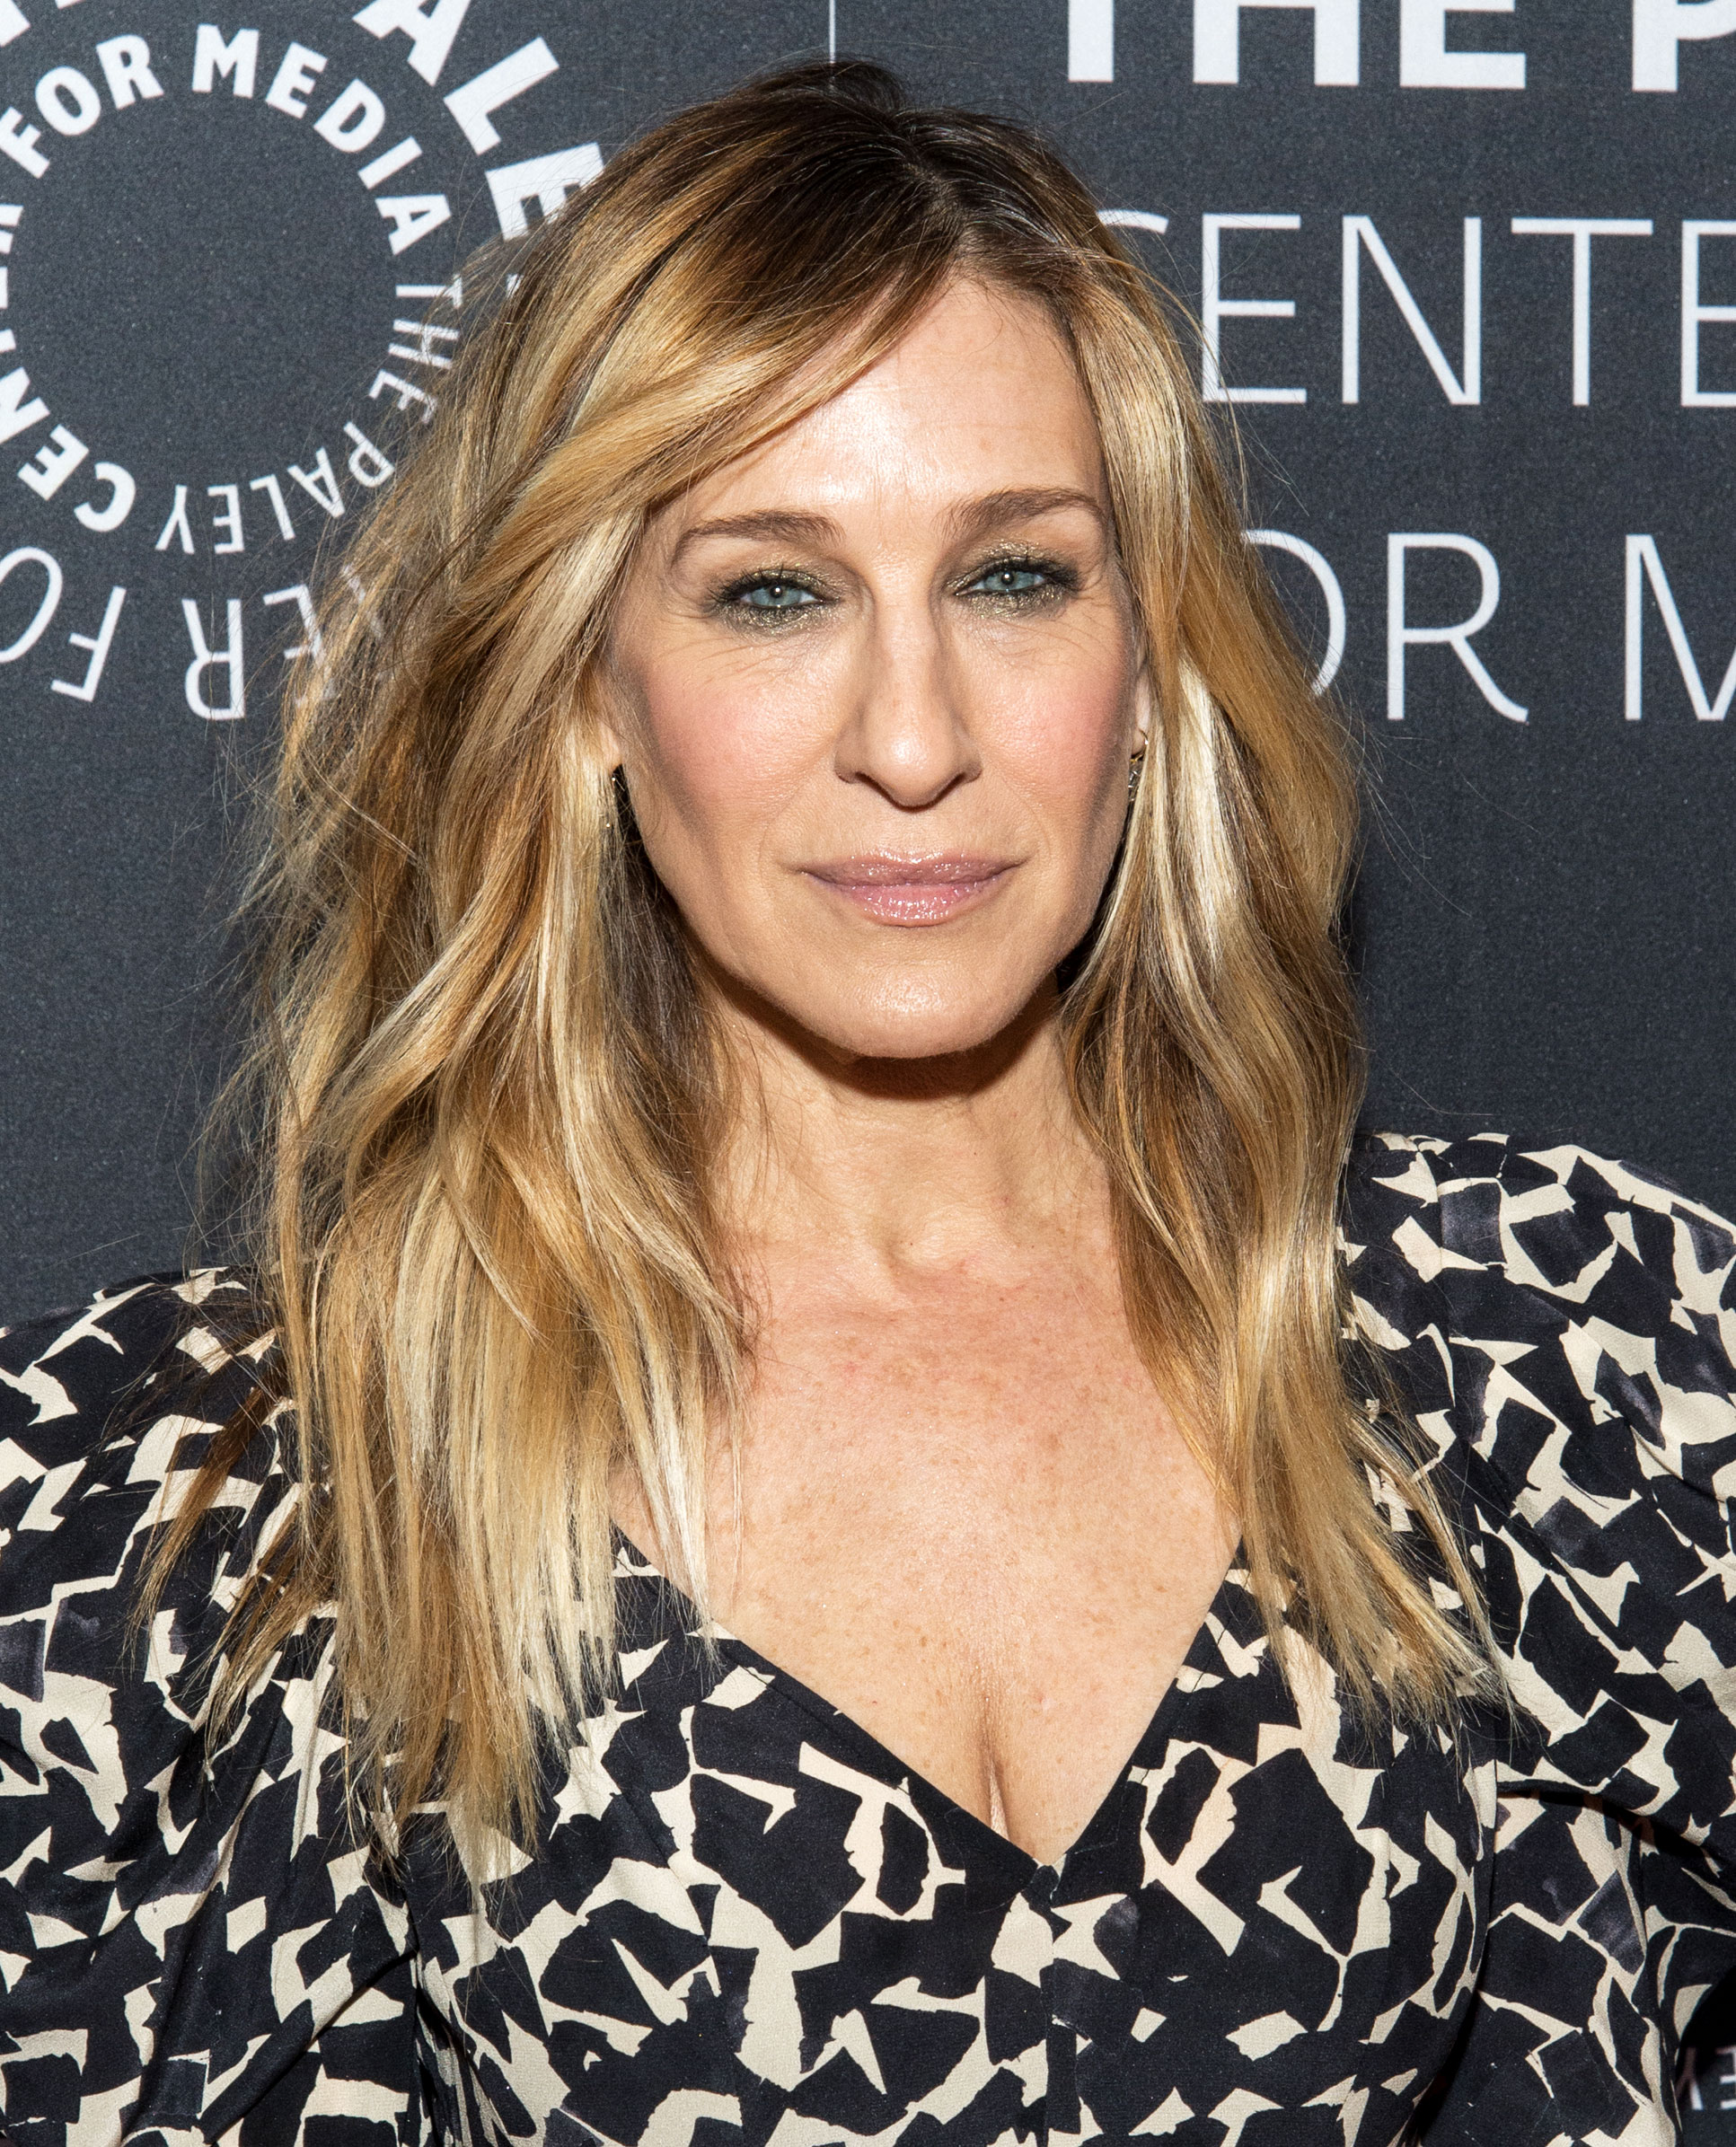 Sarah Jessica Parker Bangs by Serge Normant: Details, Tips